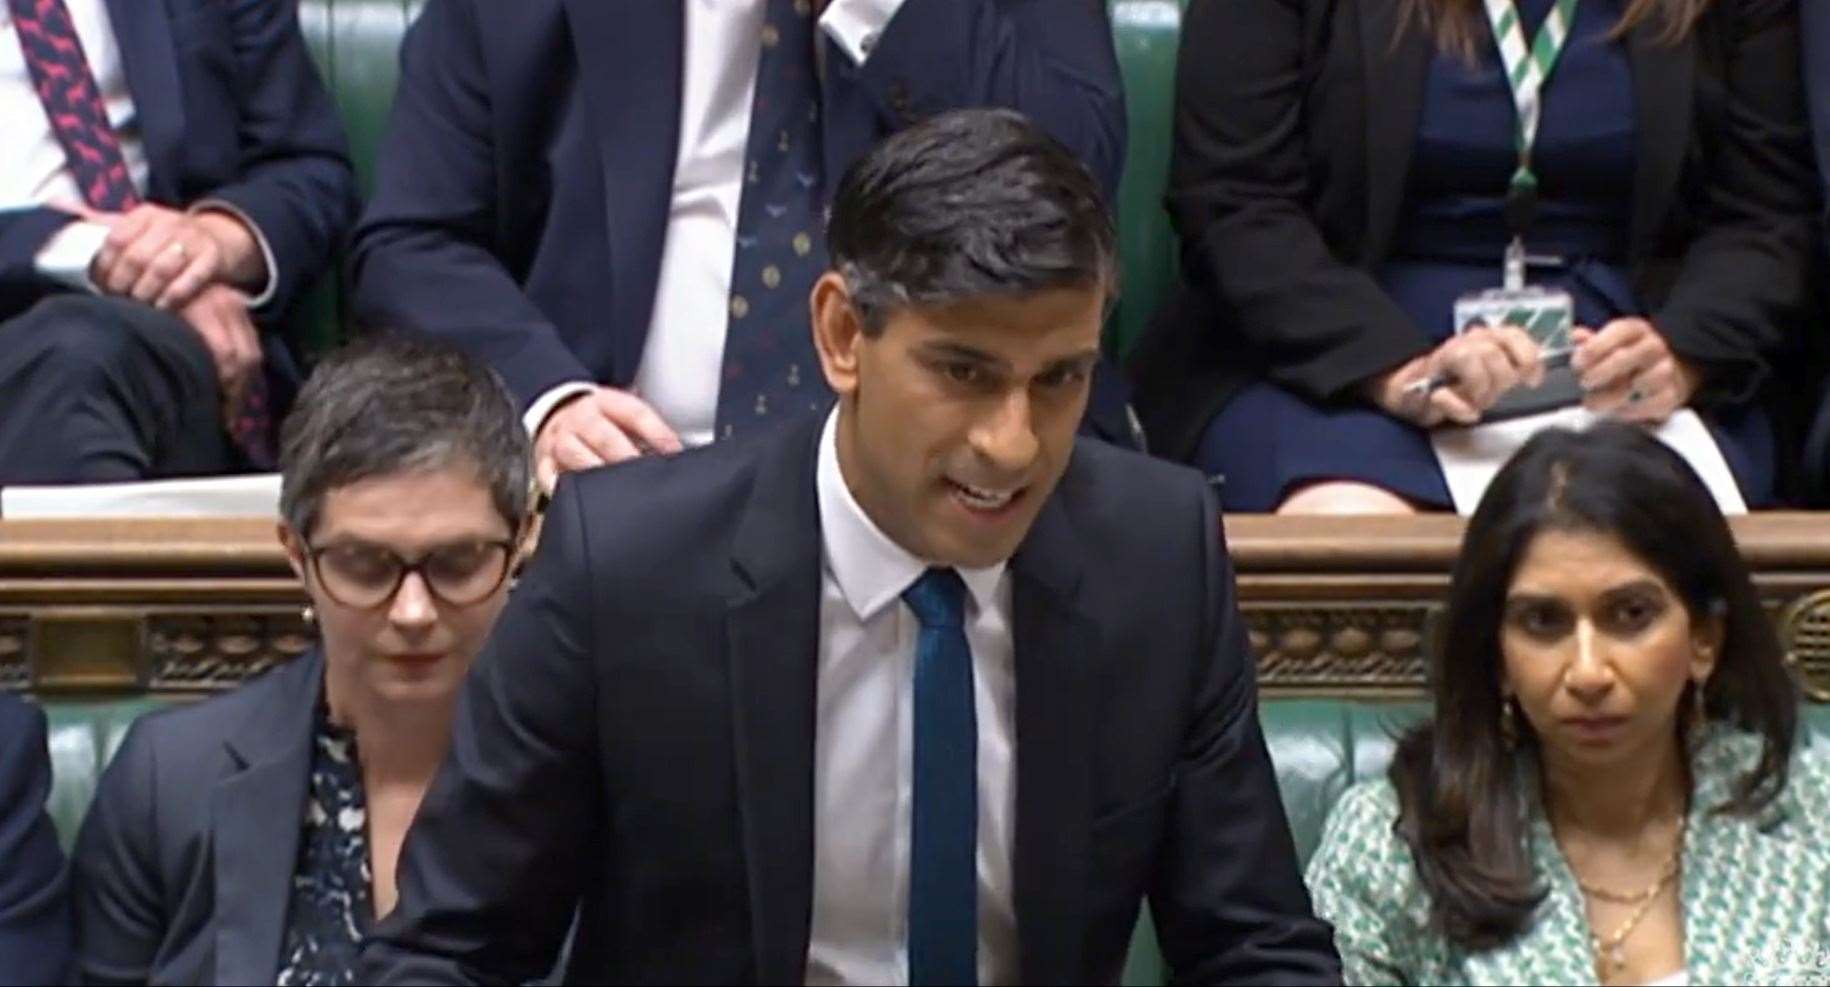 Mr Sunak faced significant opposition (House of Commons/PA)